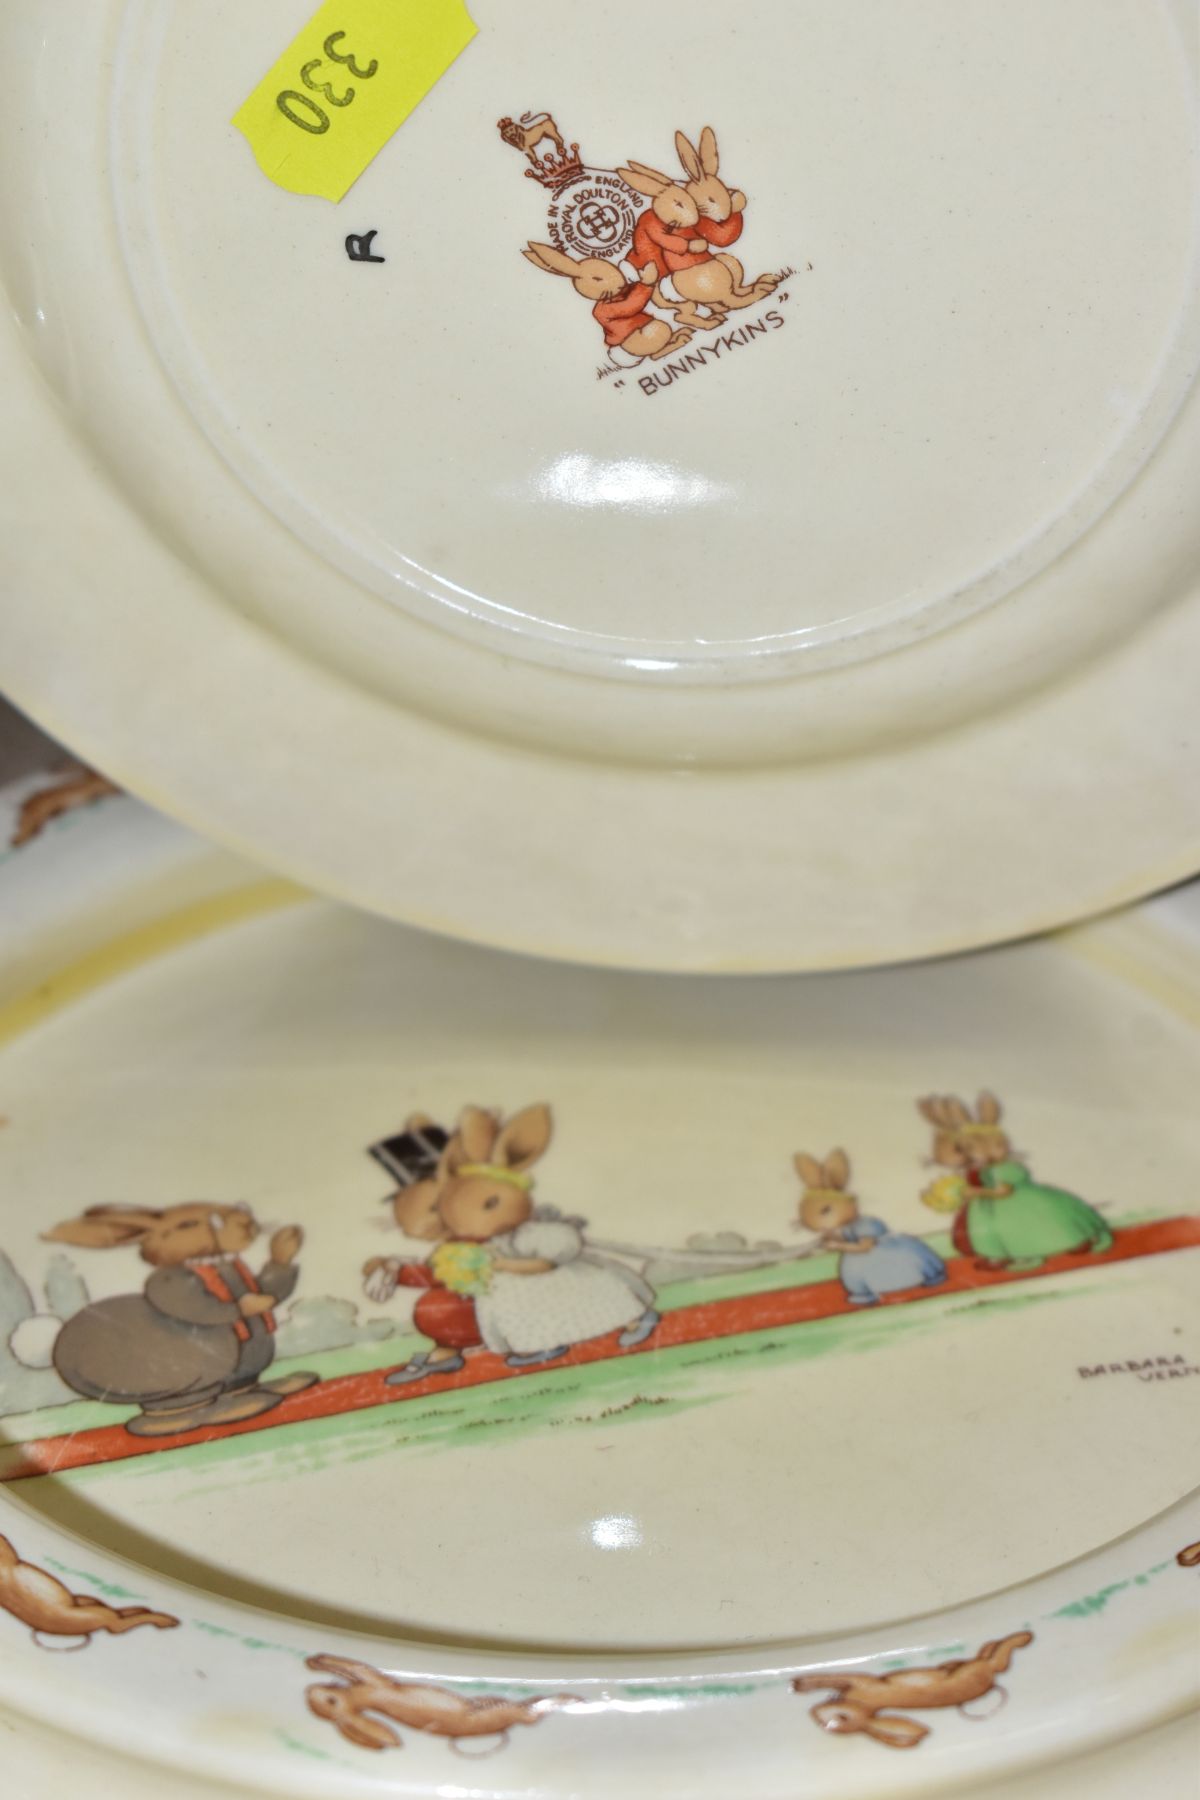 THREE PIECES OF ROYAL DOULTON BUNNYKINS EARTHENWARE TABLEWARES OF WEDDING SCENE DESIGNED BY - Image 8 of 8